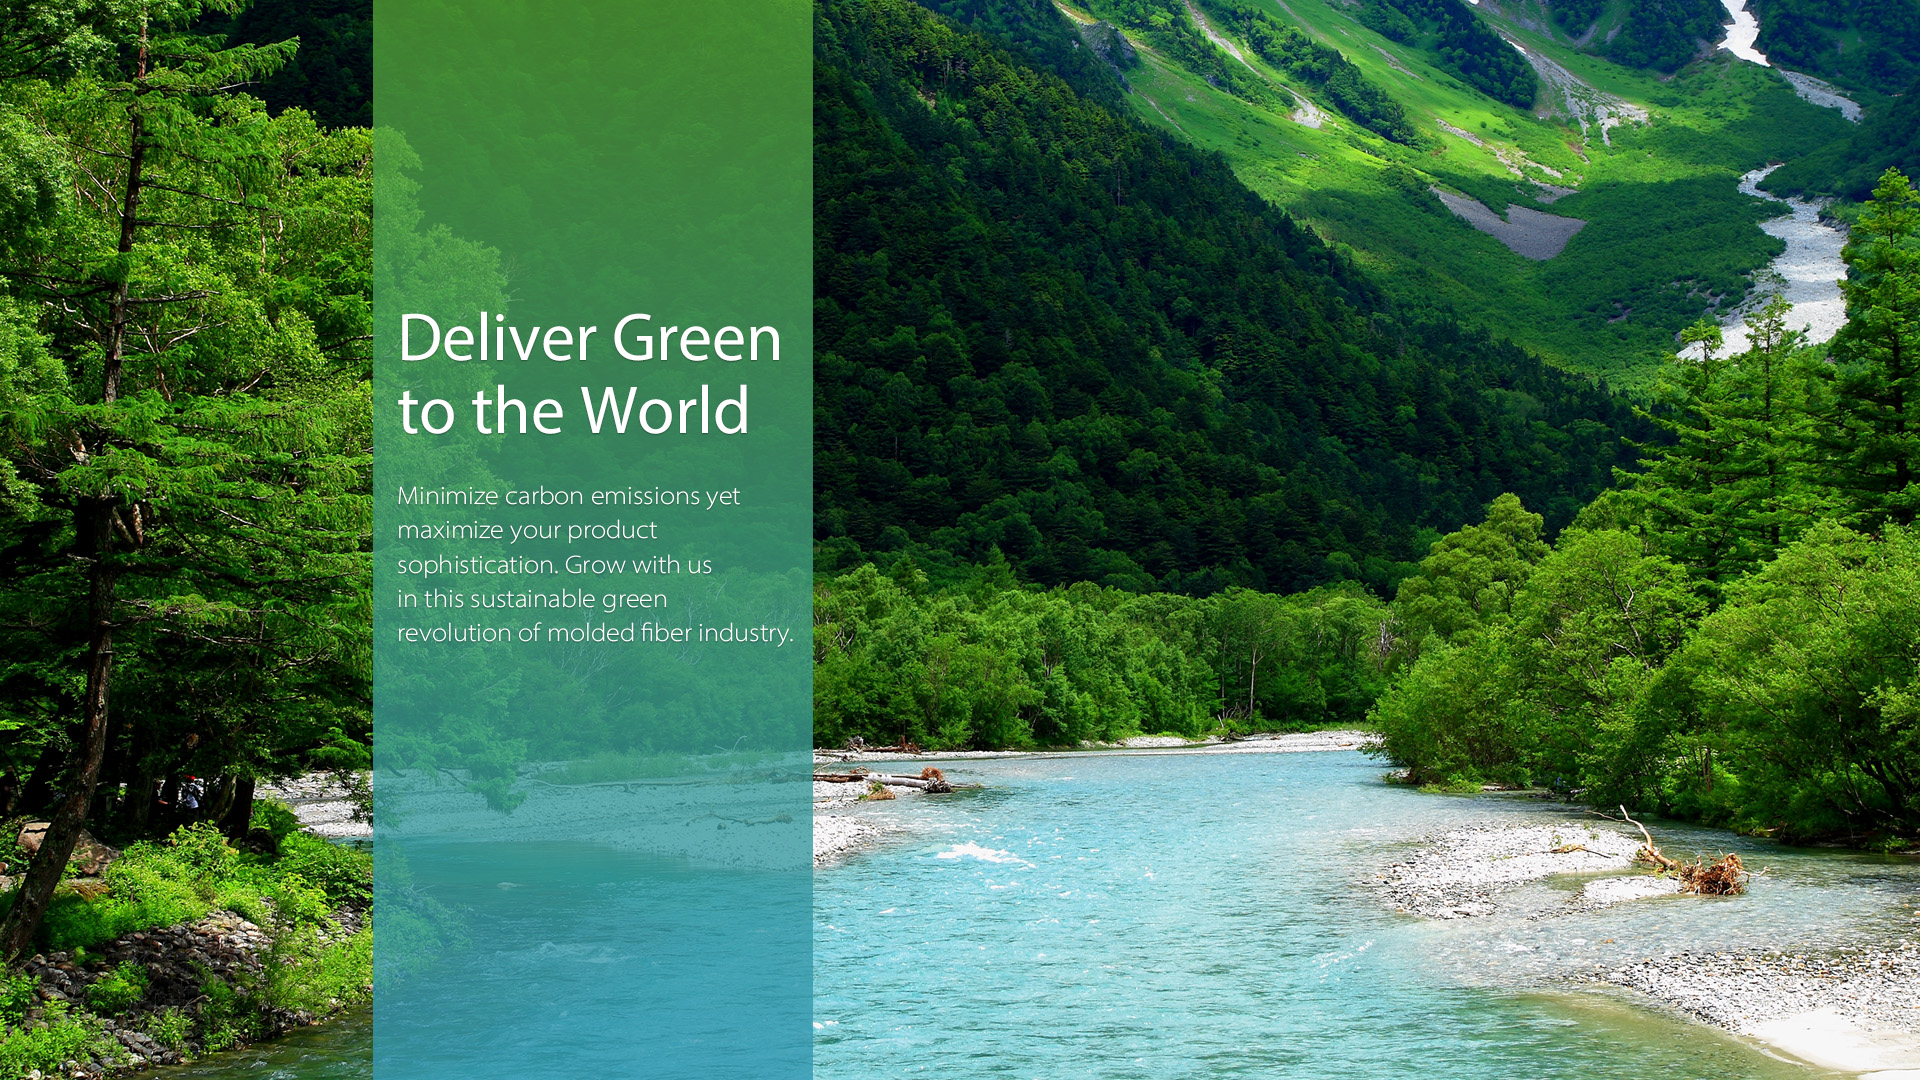 Deliver Green to the world